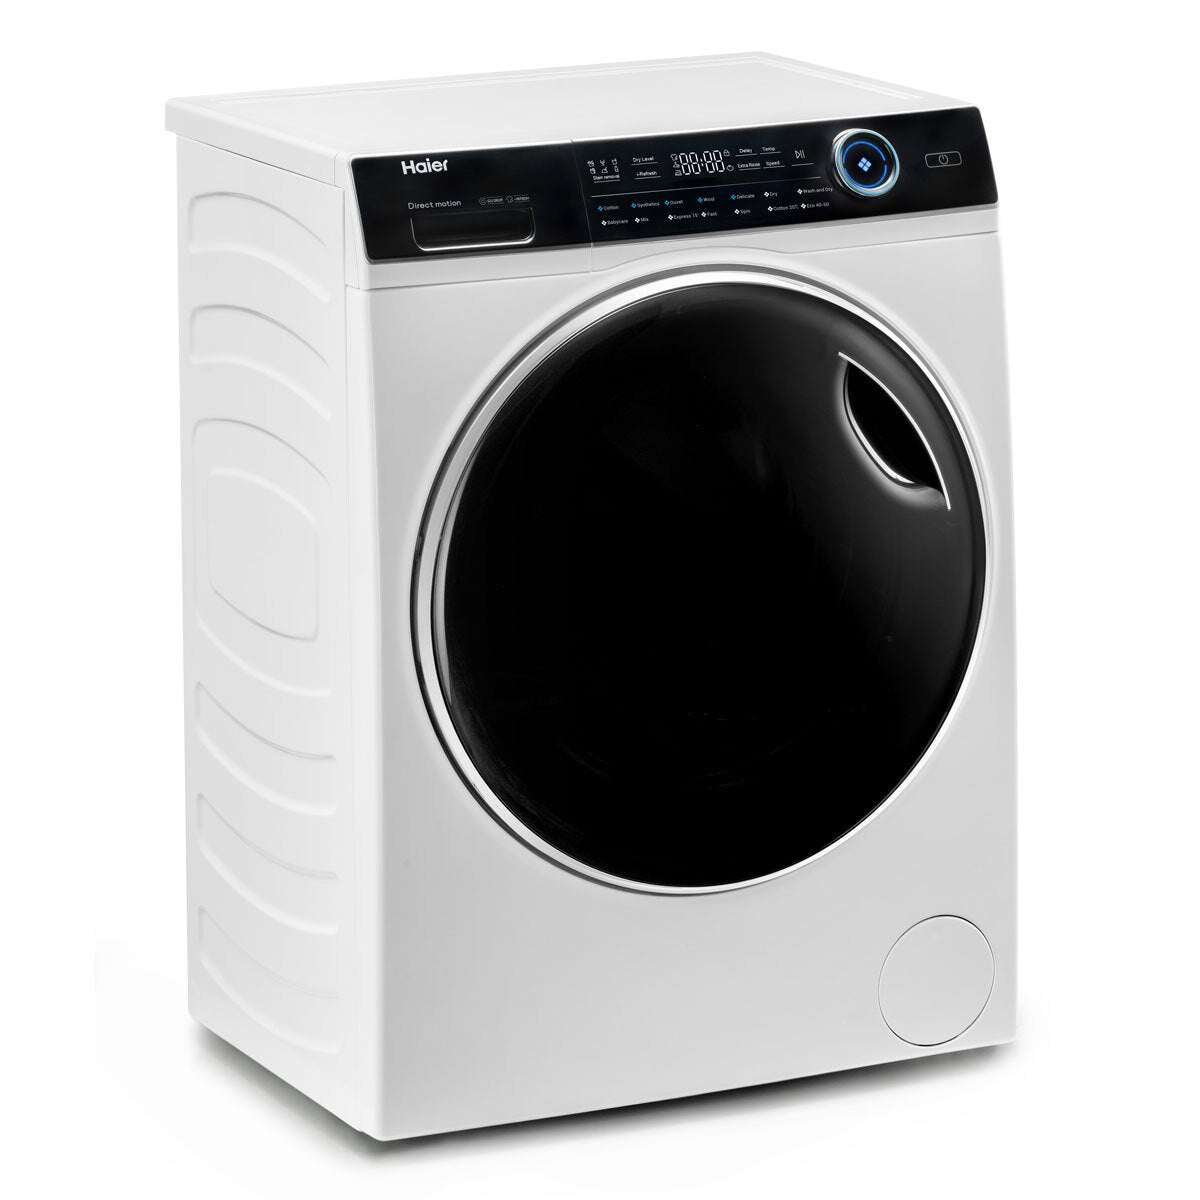 Haier HWD120-B14979, 12/8kg, 1400rpm Washer Dryer, E Rated in White